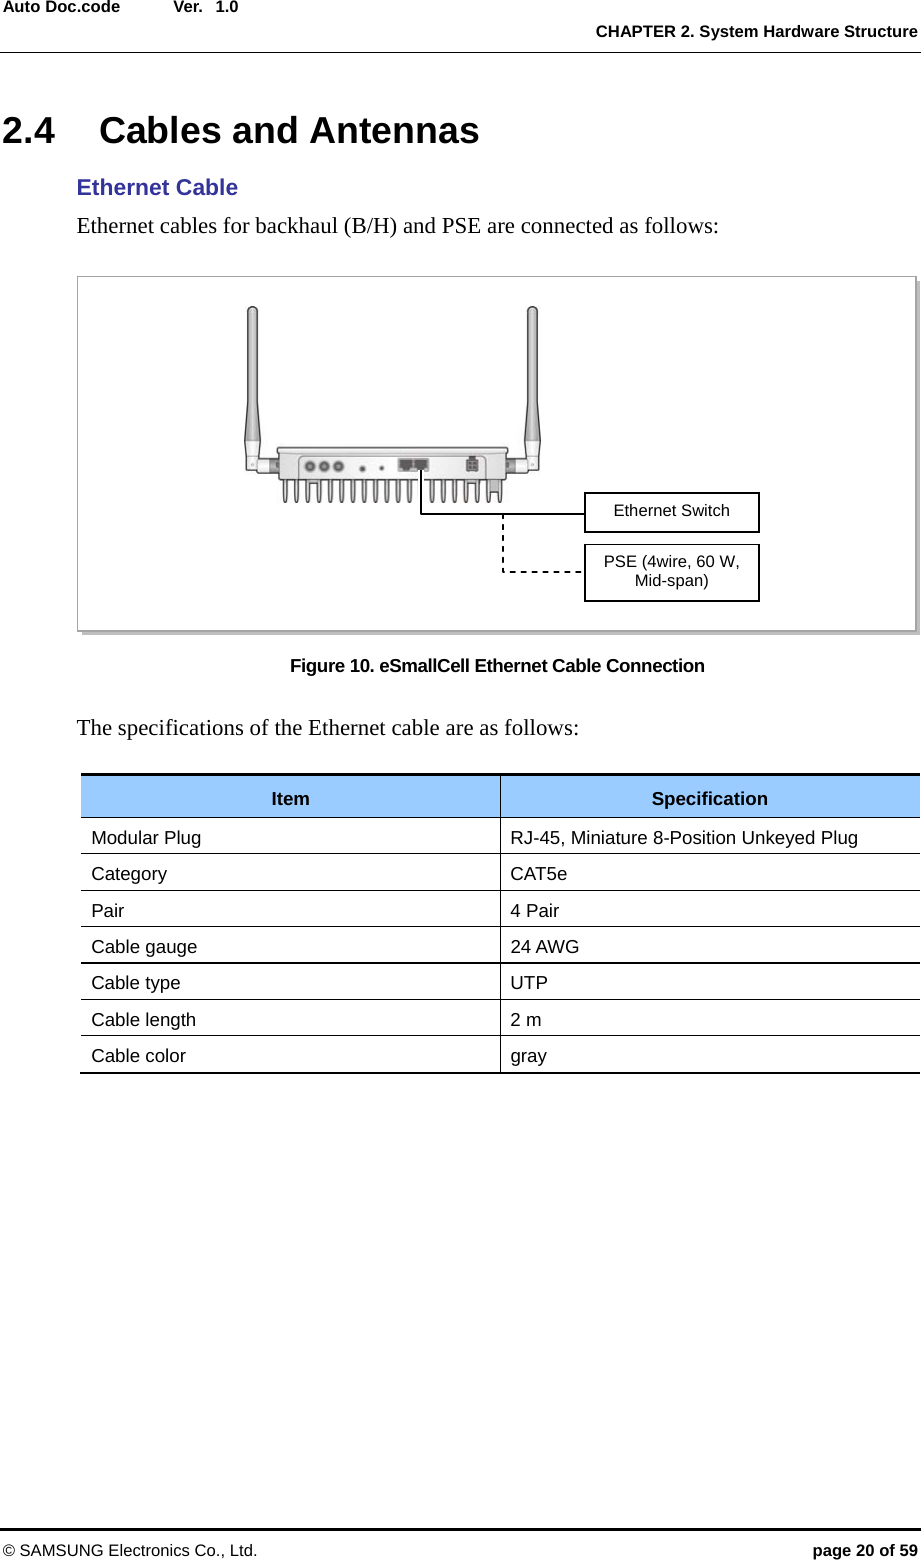  Ver.   CHAPTER 2. System Hardware Structure © SAMSUNG Electronics Co., Ltd.  page 20 of 59 Auto Doc.code  1.02.4  Cables and Antennas Ethernet Cable Ethernet cables for backhaul (B/H) and PSE are connected as follows:    Figure 10. eSmallCell Ethernet Cable Connection  The specifications of the Ethernet cable are as follows:  Item  Specification Modular Plug  RJ-45, Miniature 8-Position Unkeyed Plug Category CAT5e Pair 4 Pair Cable gauge  24 AWG Cable type  UTP Cable length  2 m Cable color  gray  Ethernet Switch PSE (4wire, 60 W, Mid-span) 